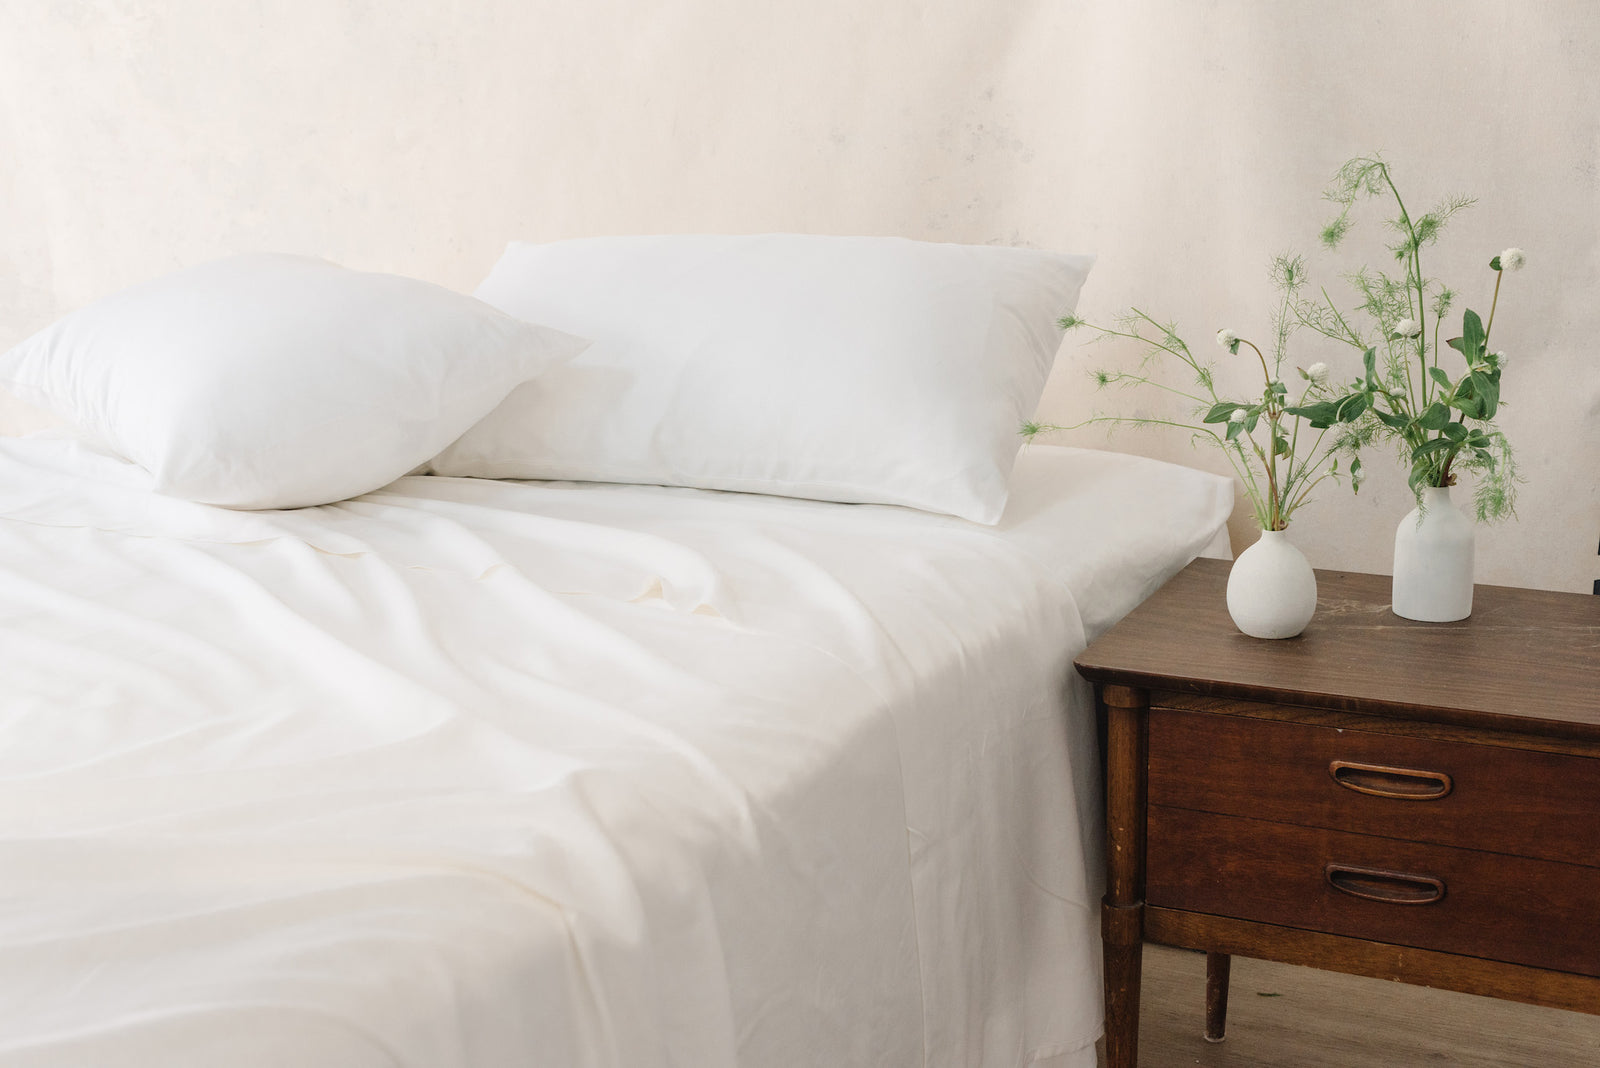 White Linen Bamboo Fitted Sheet on bed.  